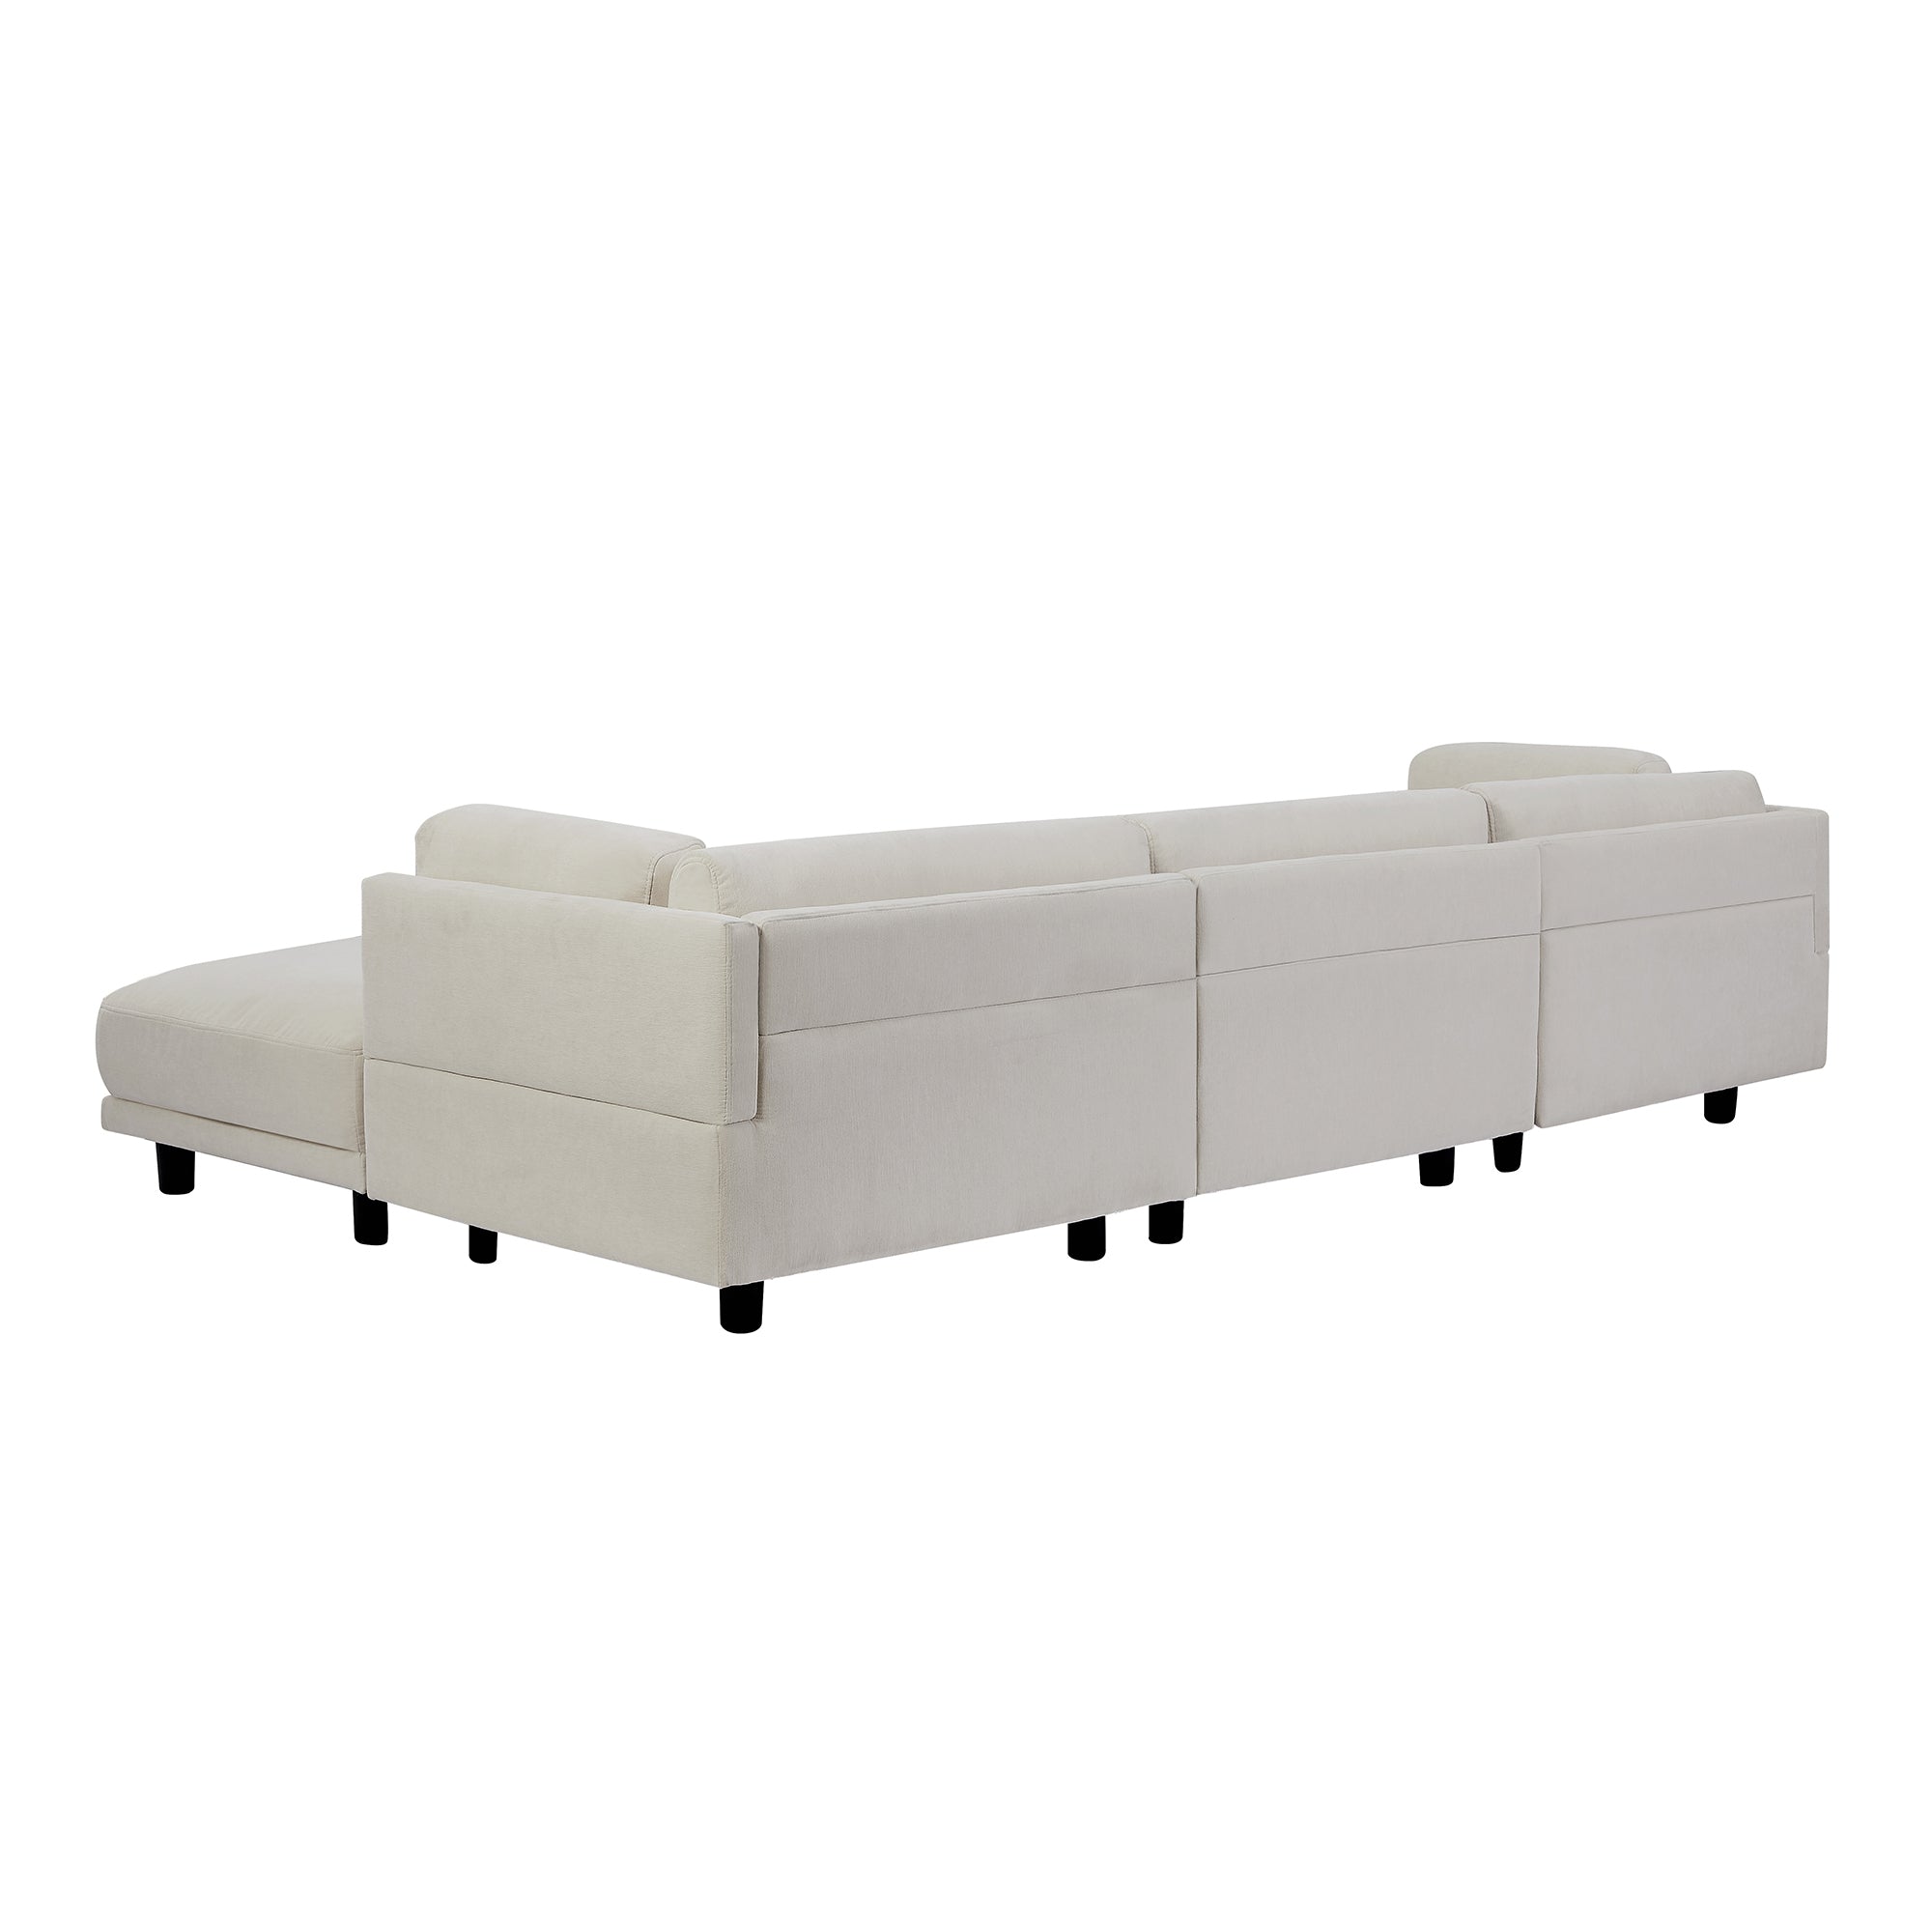 U_STYLE Upholstery Convertible Sectional Sofa, L Shaped Couch with Reversible Chaise-Stationary Sectionals-American Furniture Outlet